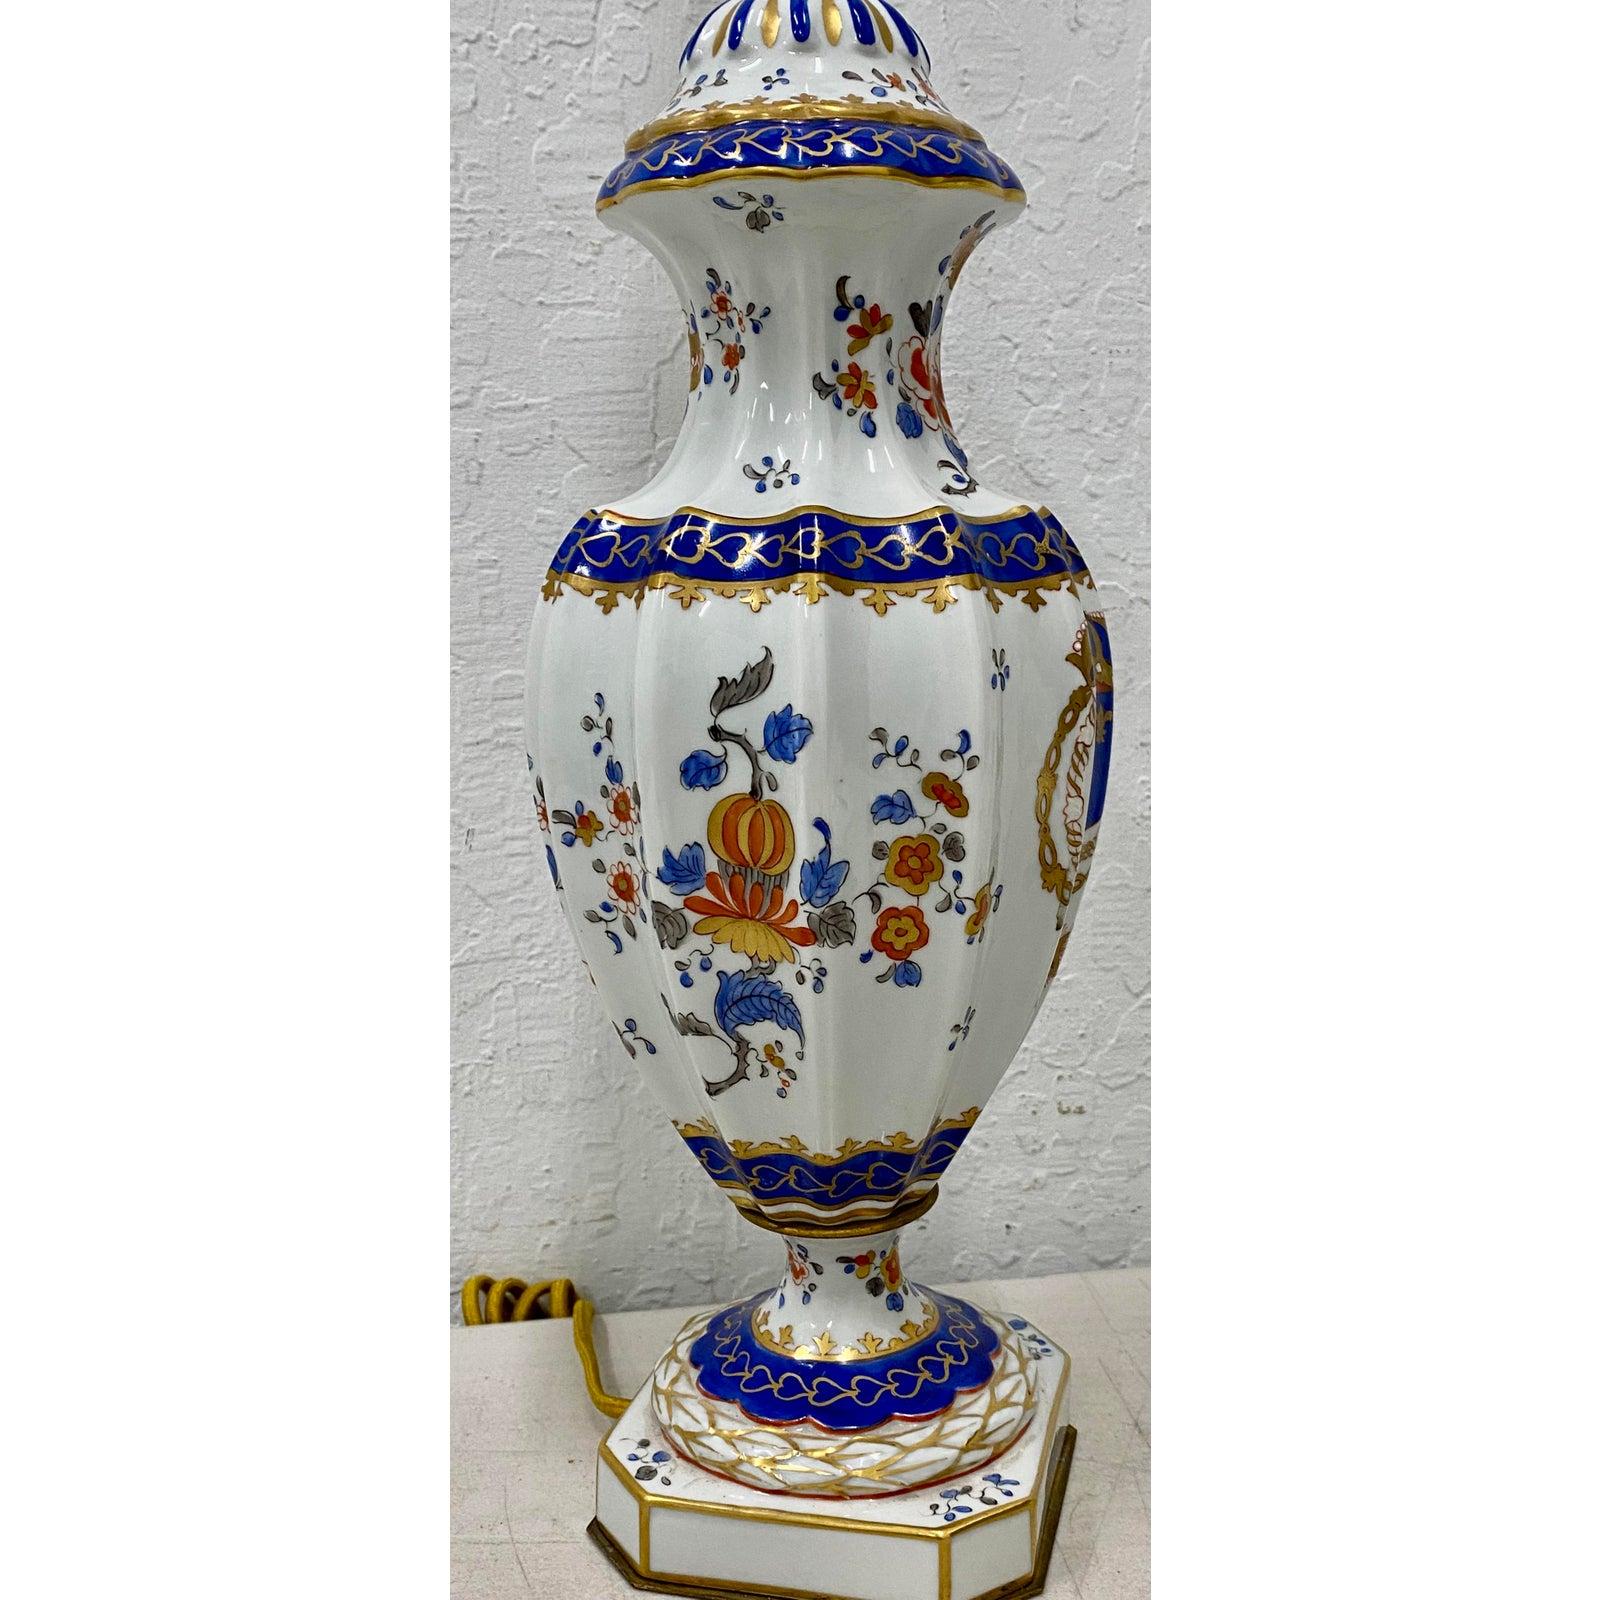 19th century hand painted porcelain urn table lamp

6